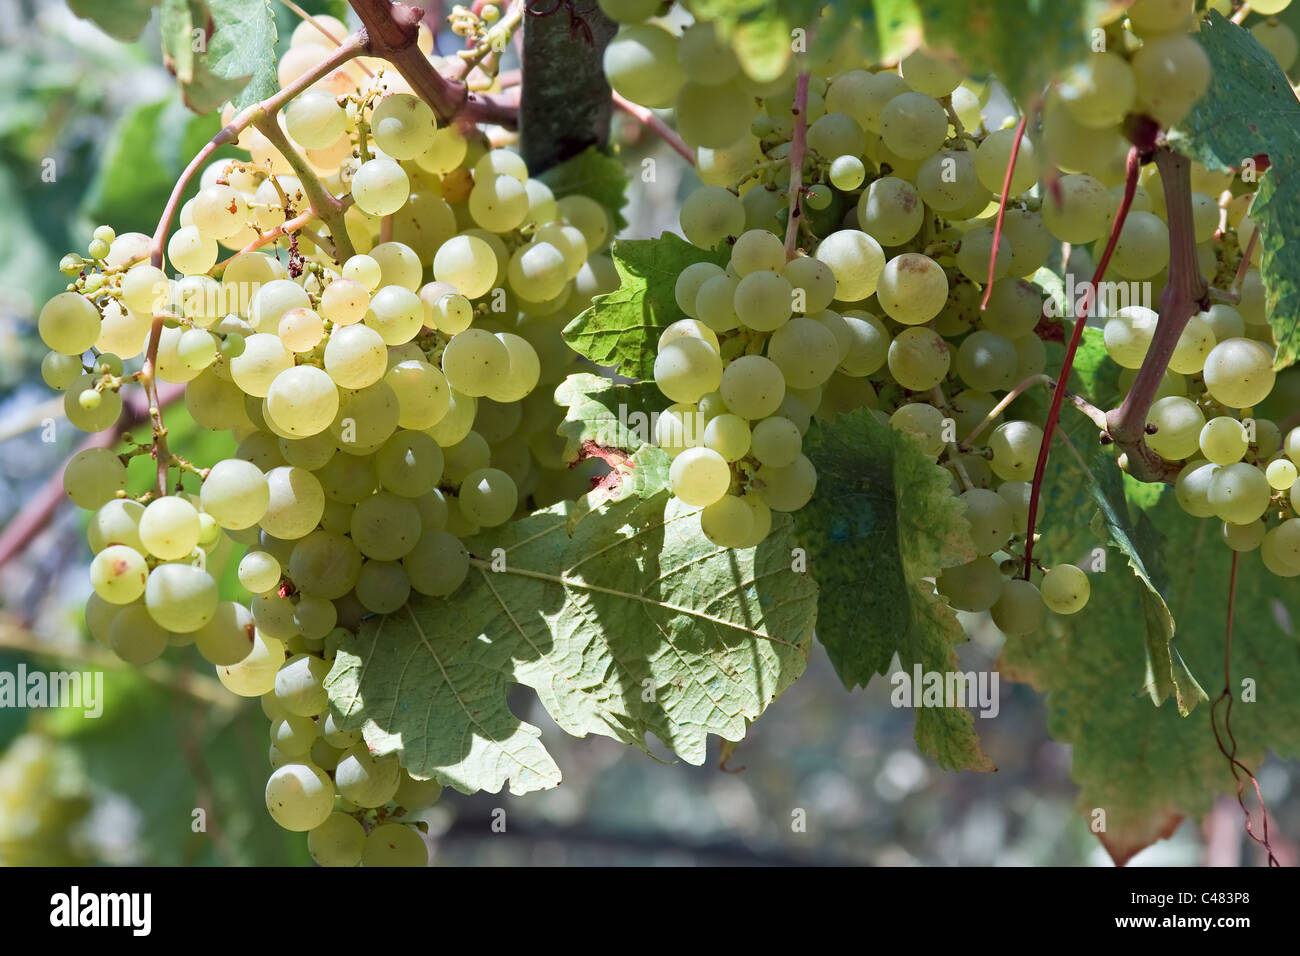 bunch of white grapes hanging in a vineyard Stock Photo